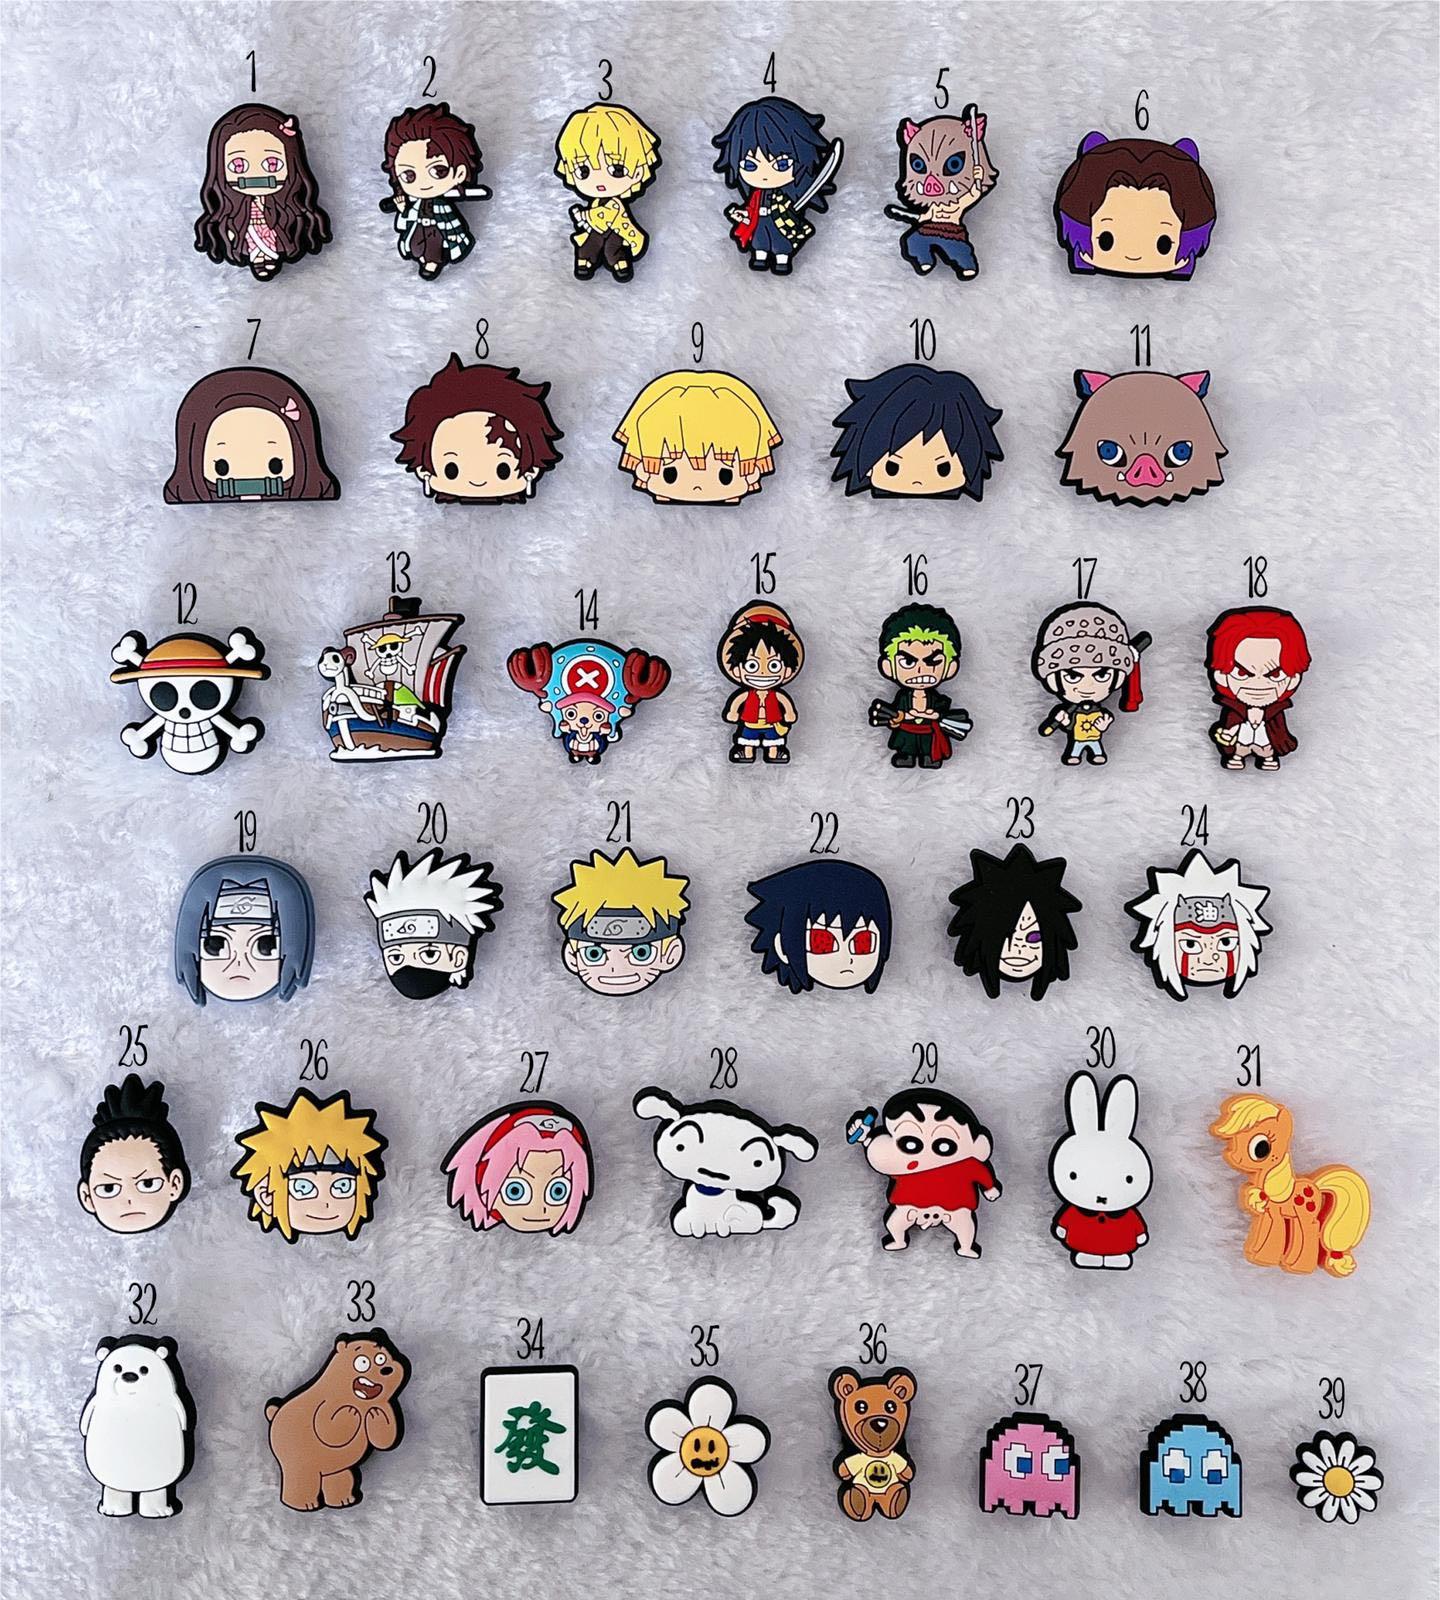 Sale > anime charms for crocs > in stock